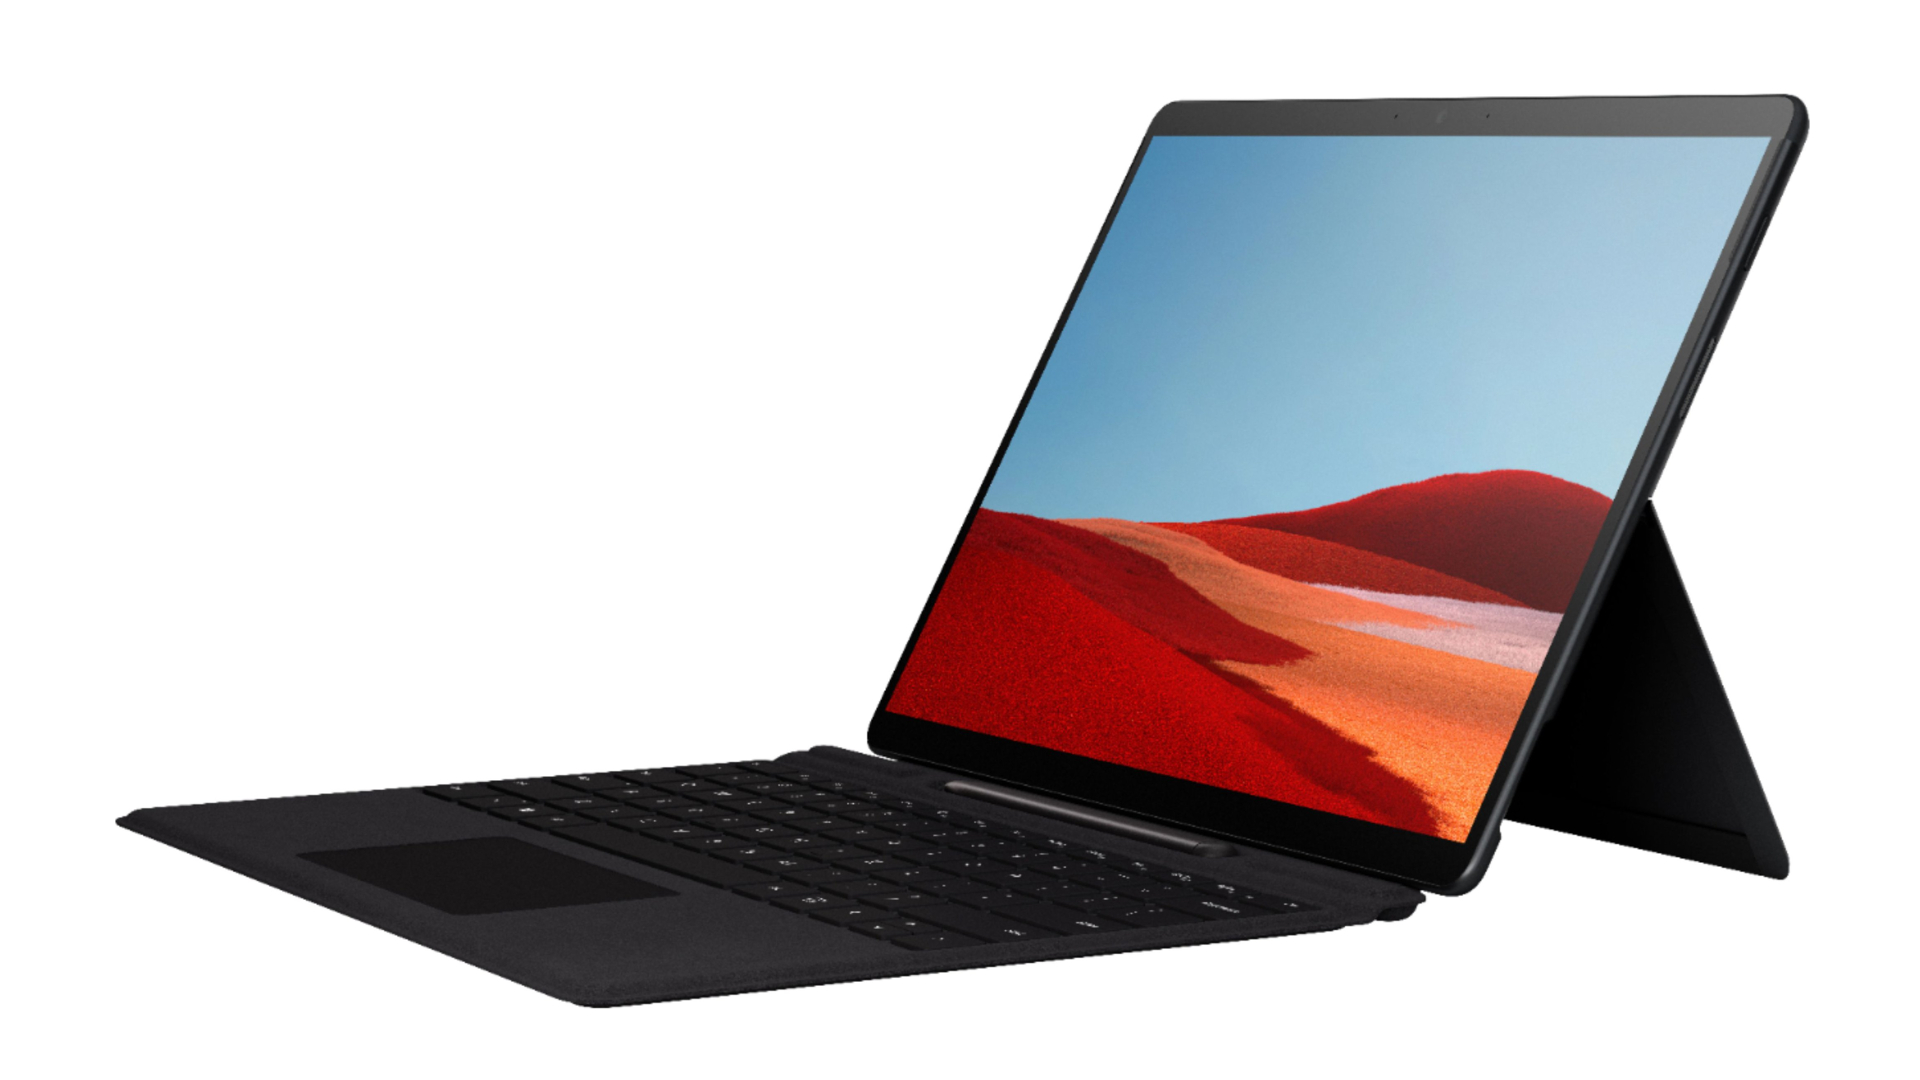 Microsoft Surface Pro 7 Surface Laptop 3 And Arm Powered Surface Are All Revealed In Leaked 